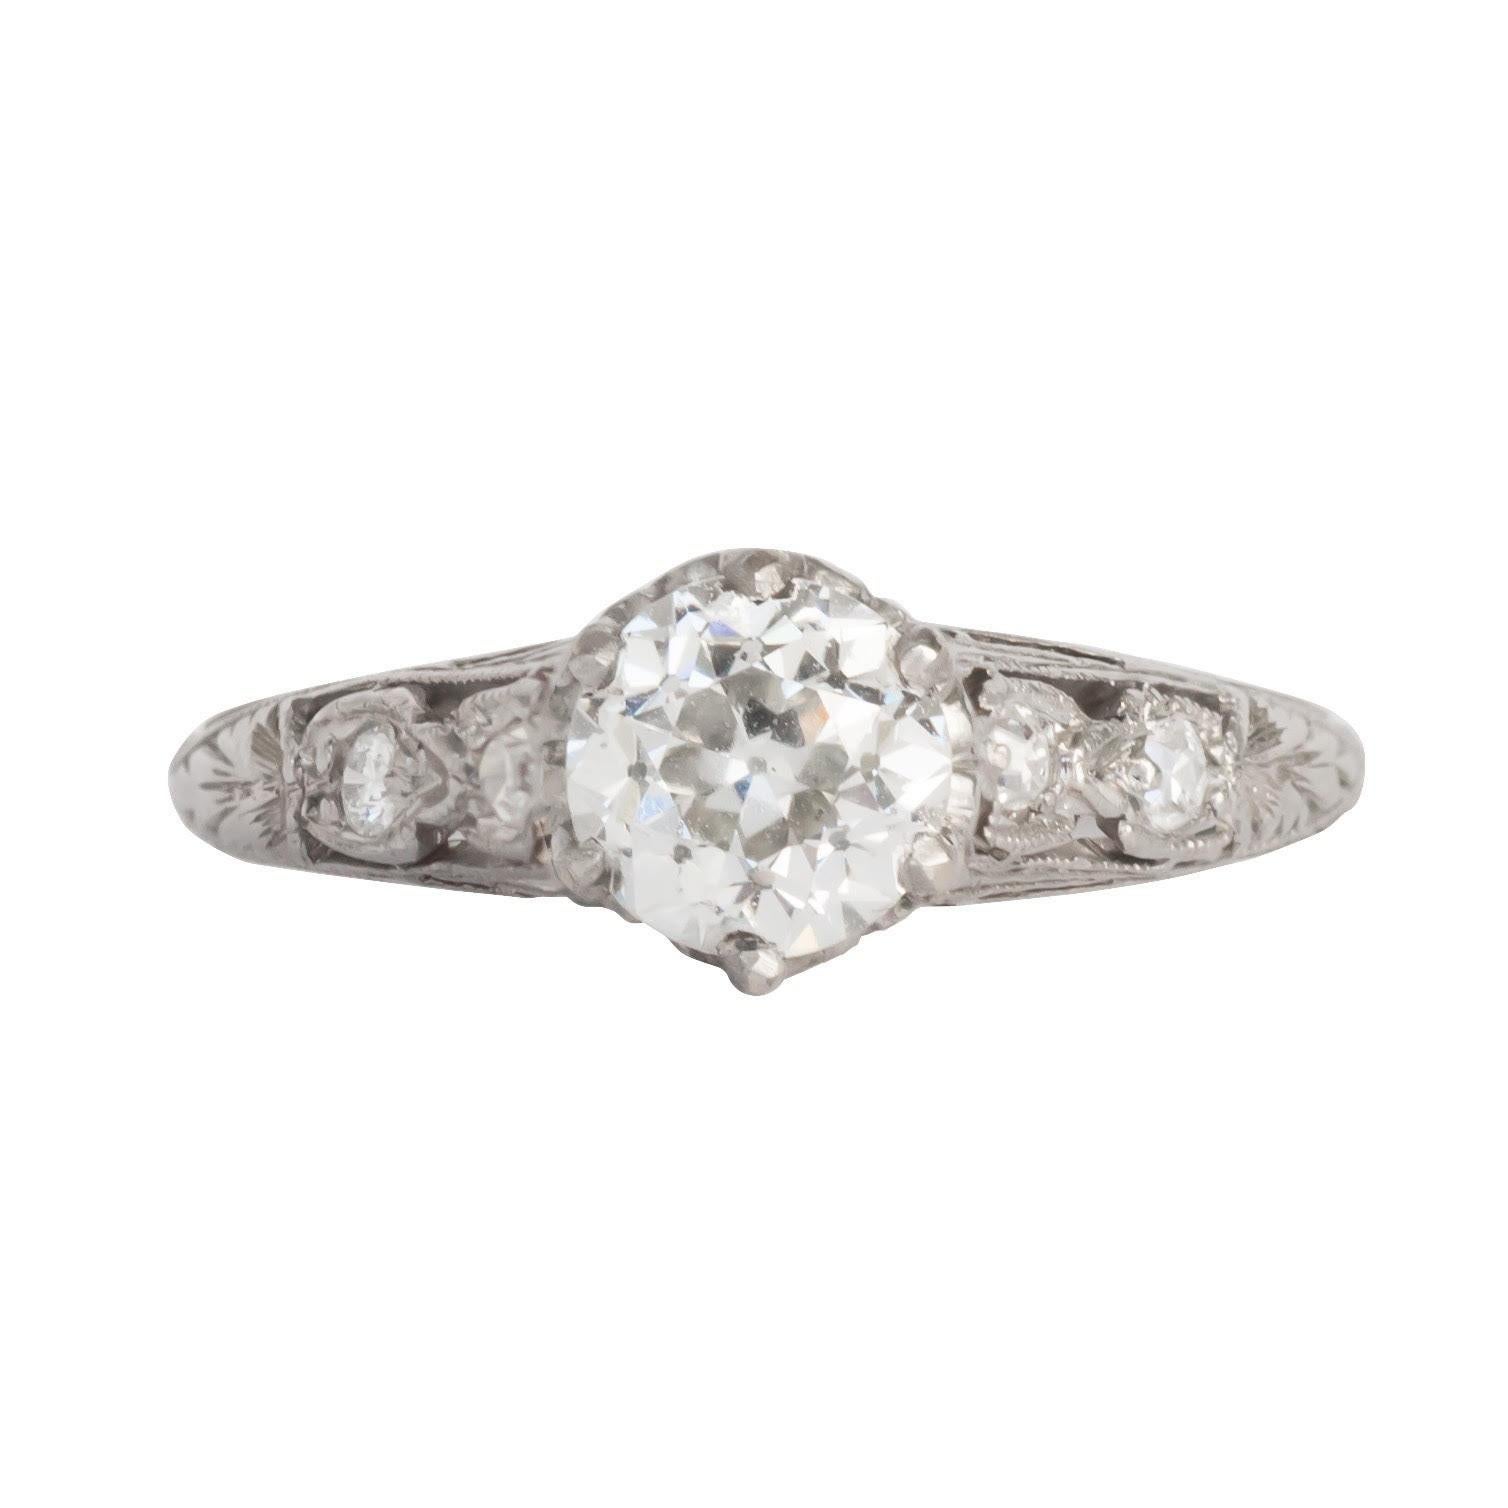 Presenting an extraordinary testament to the Edwardian era, this engagement ring stands as an exquisite example of the early 1900s craftsmanship. Remarkably preserved, it exudes the era's intricate detailing and unparalleled charm, having been